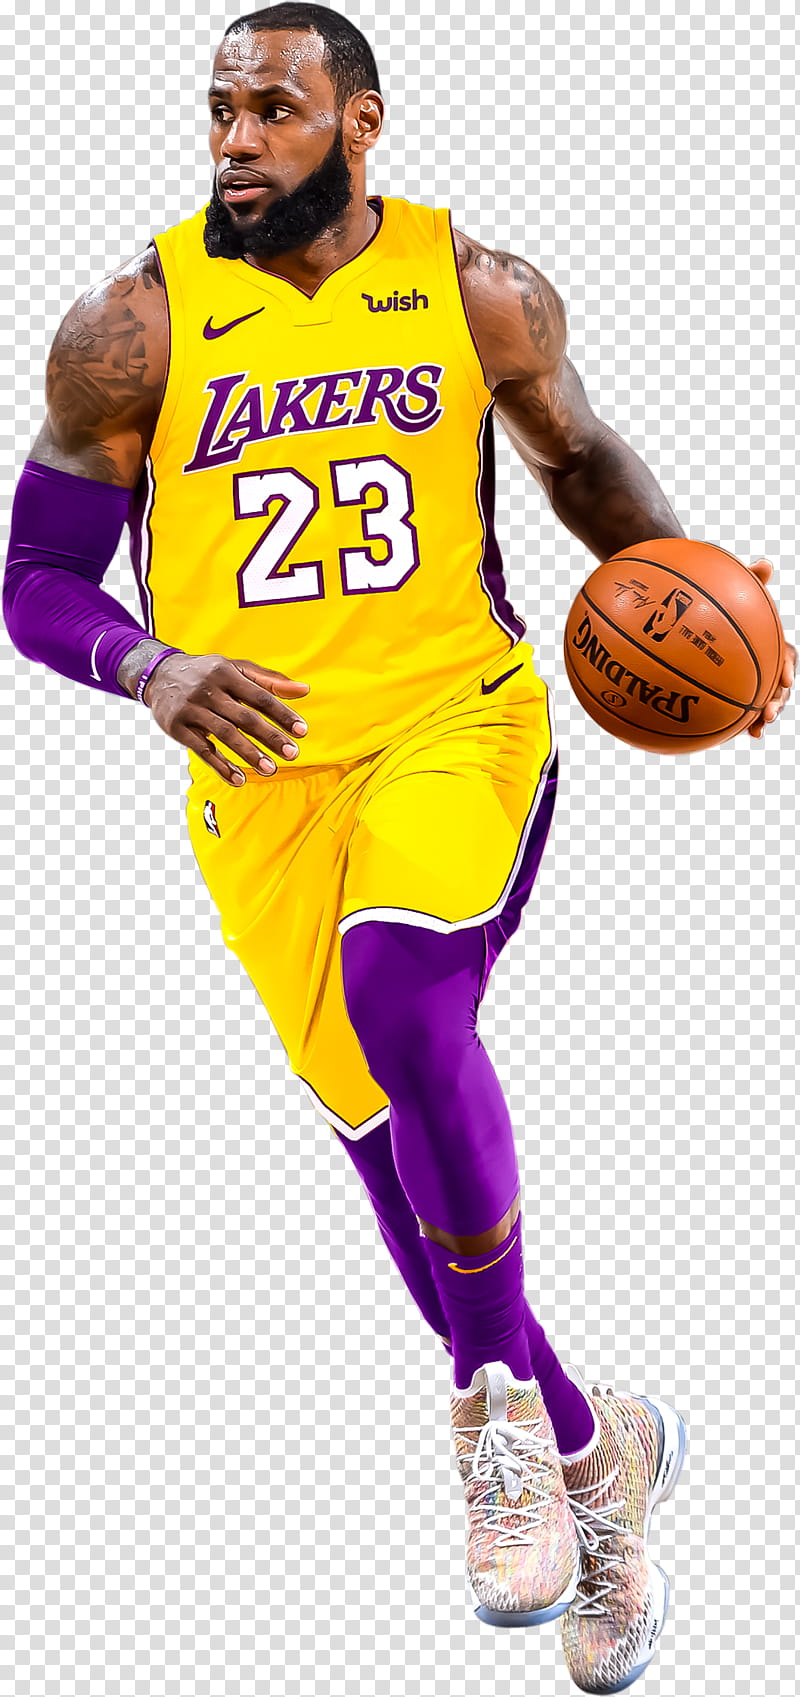 Basketball, Lebron James, Los Angeles Lakers, Cleveland Cavaliers, NBA Finals, Kyrie Irving, Brandon Ingram, Basketball Player transparent background PNG clipart